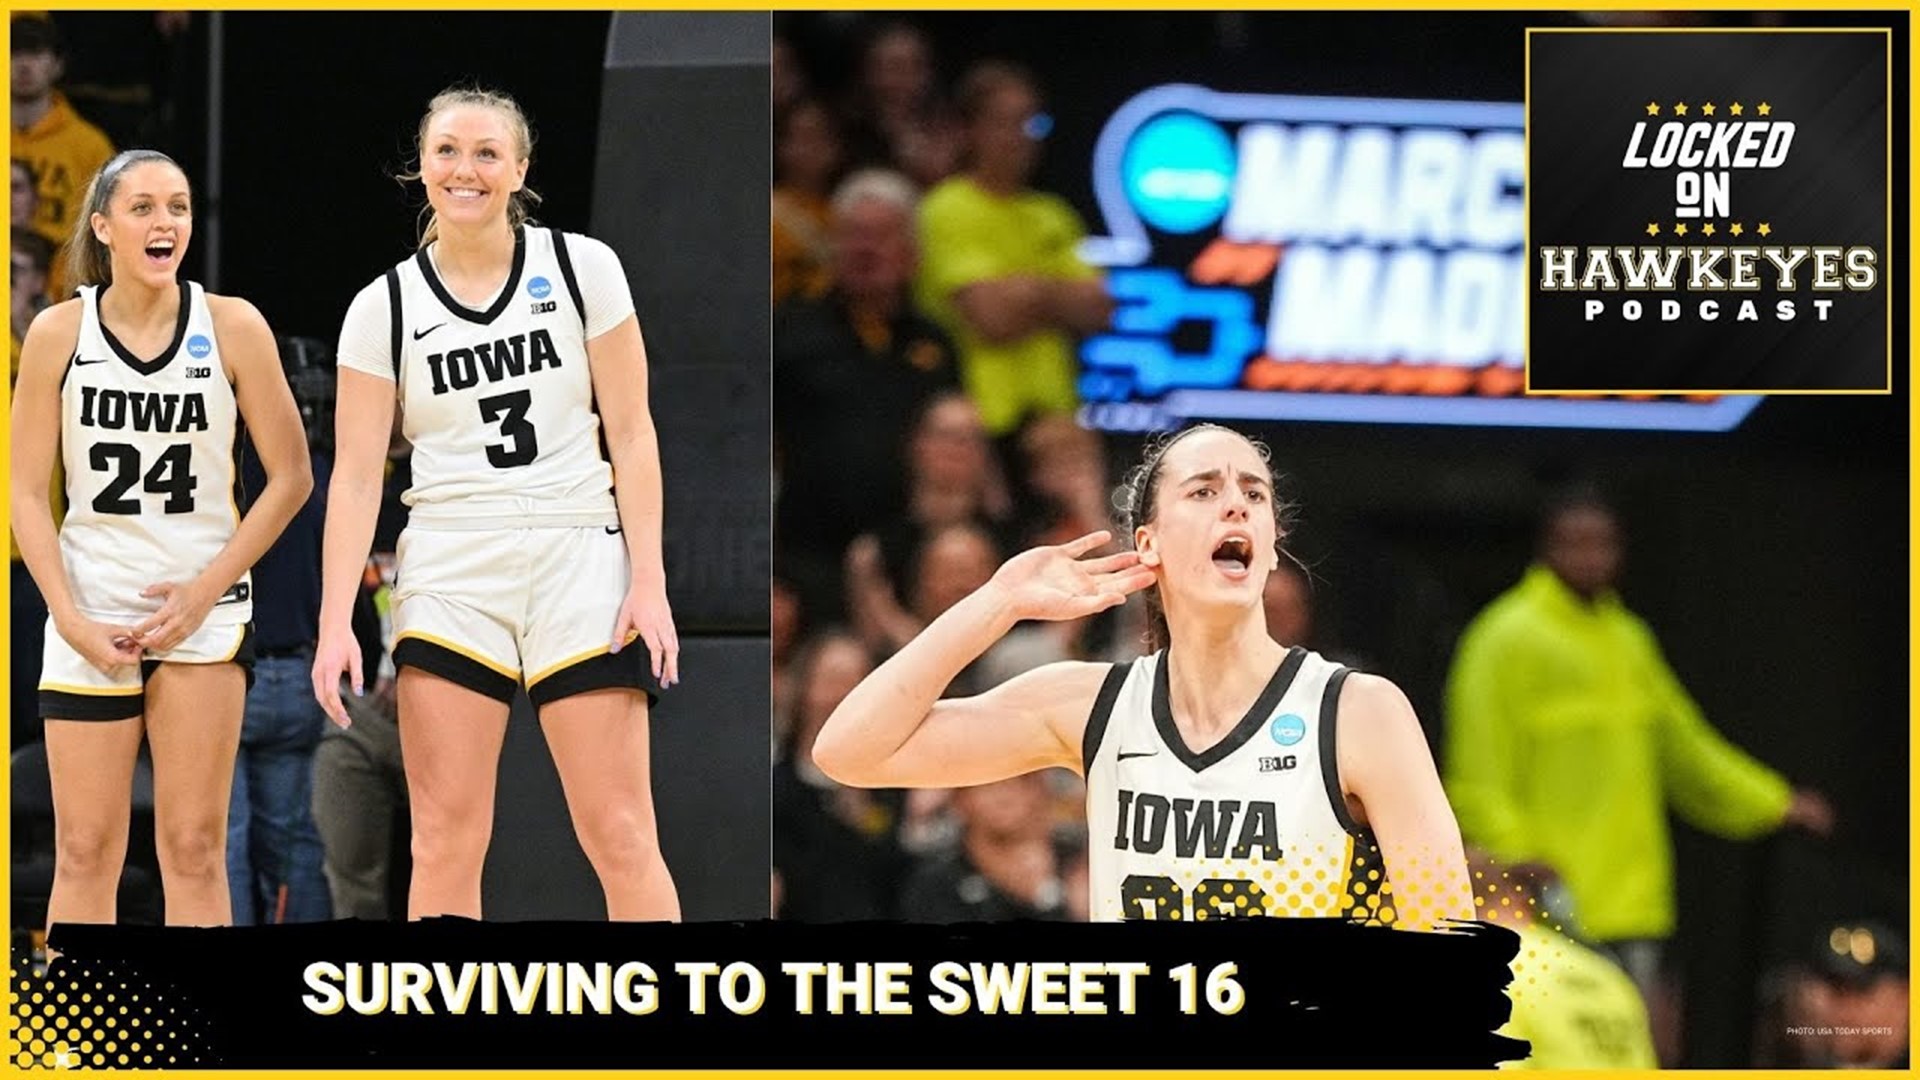 INSTANT REACTION: Hawkeye Hoops - Iowa Women on to the Sweet 16, The Sydney Affolter play